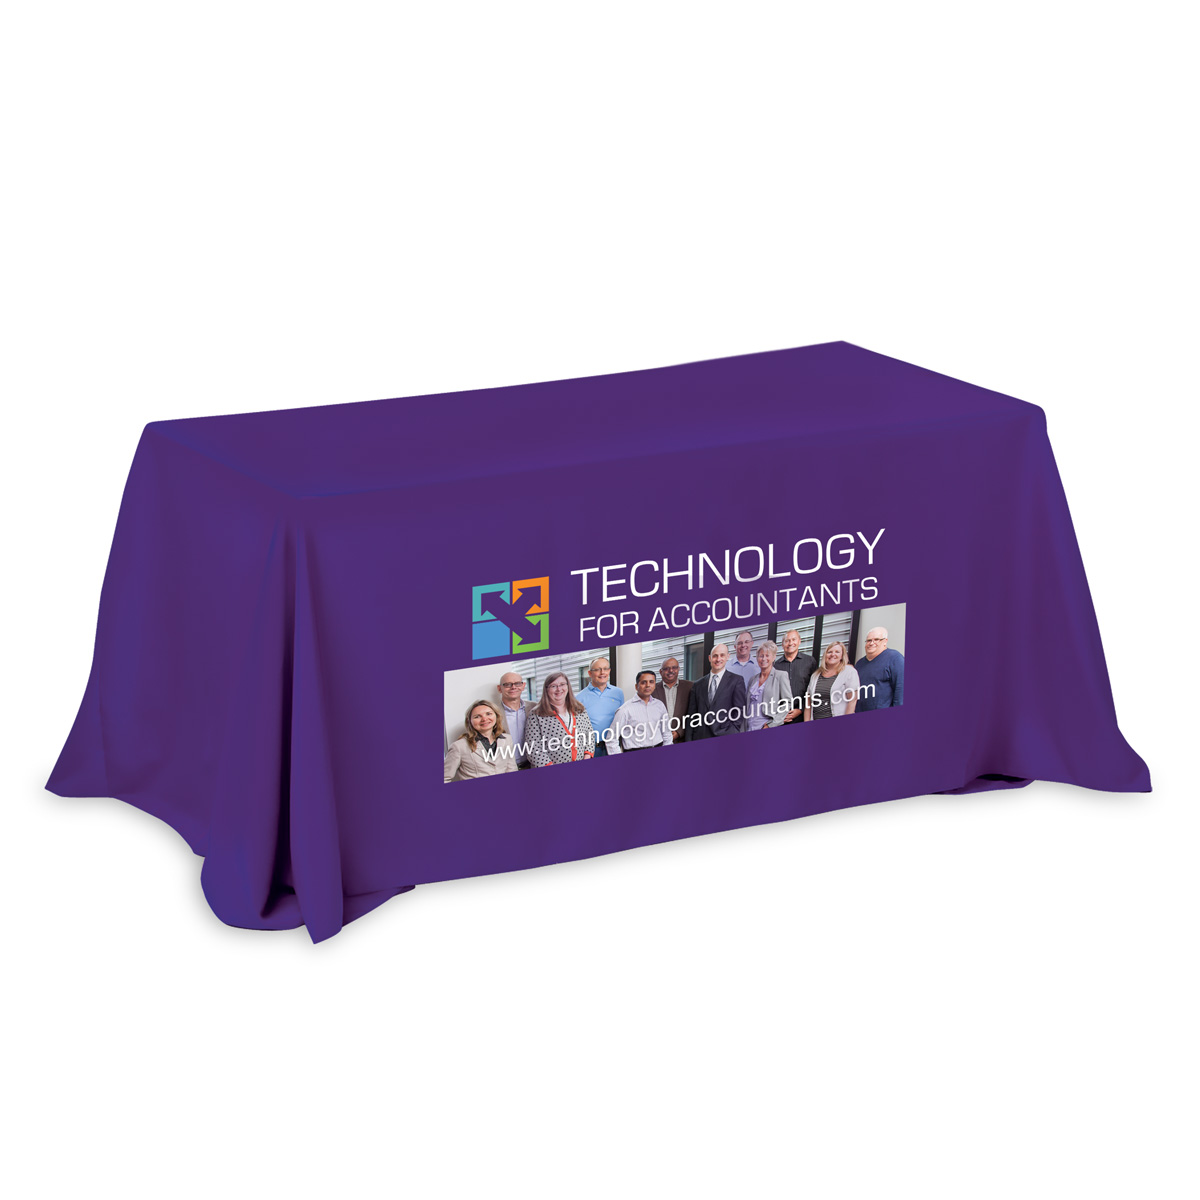 "Zenyatta Eight" 8 ft 4-Sided Throw Style Table Covers & Table Throws (PhotoImage Full Colour) / Fits 8 ft Table